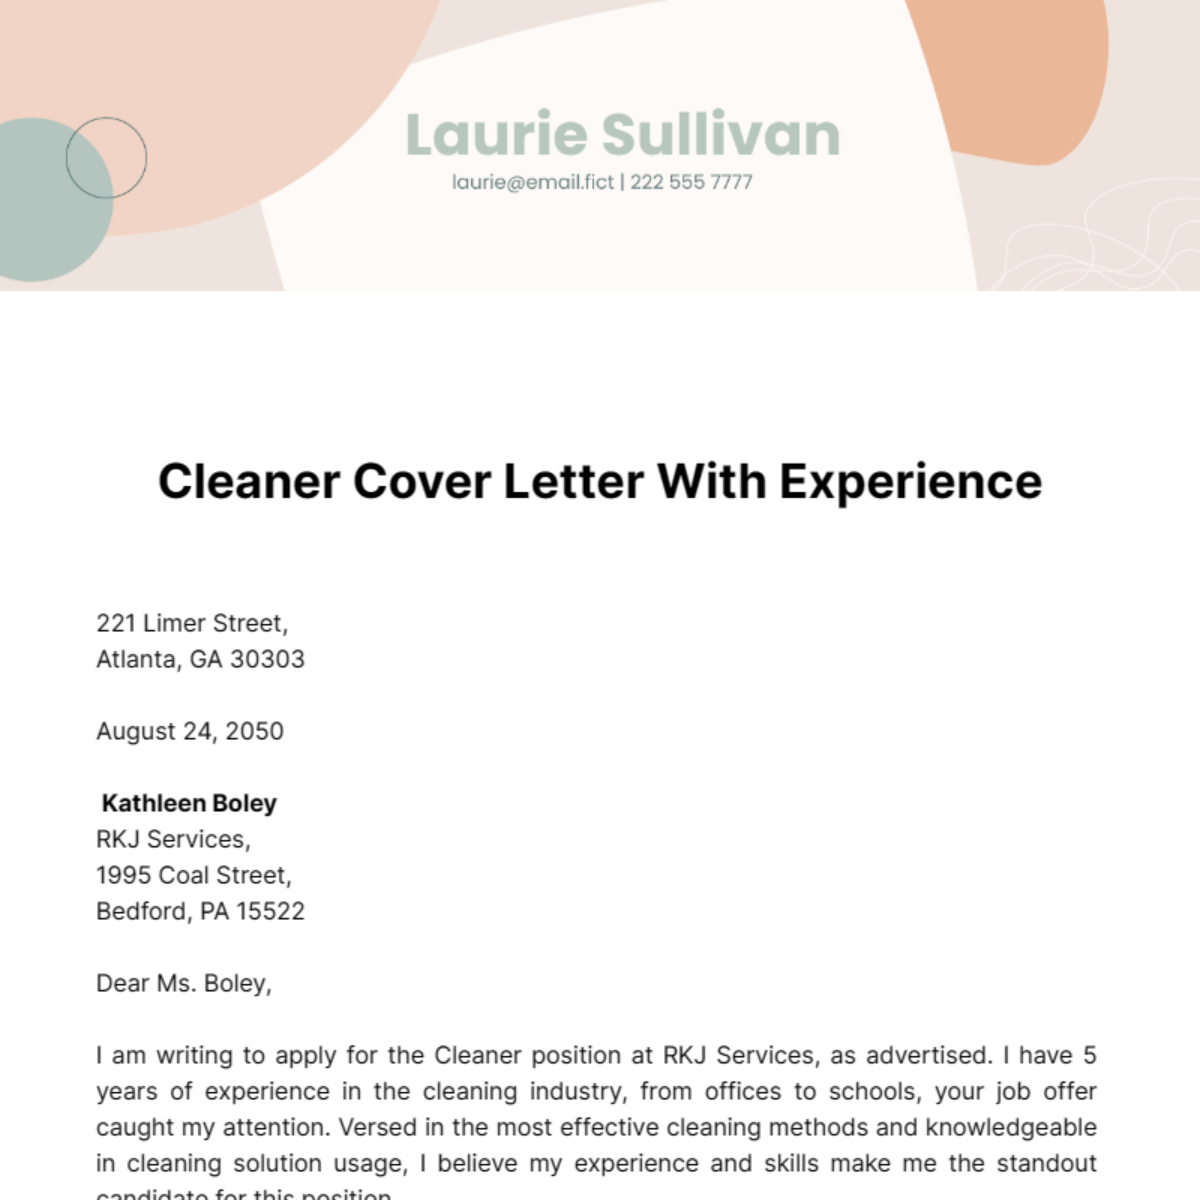 Cleaner Cover Letter with Experience Template